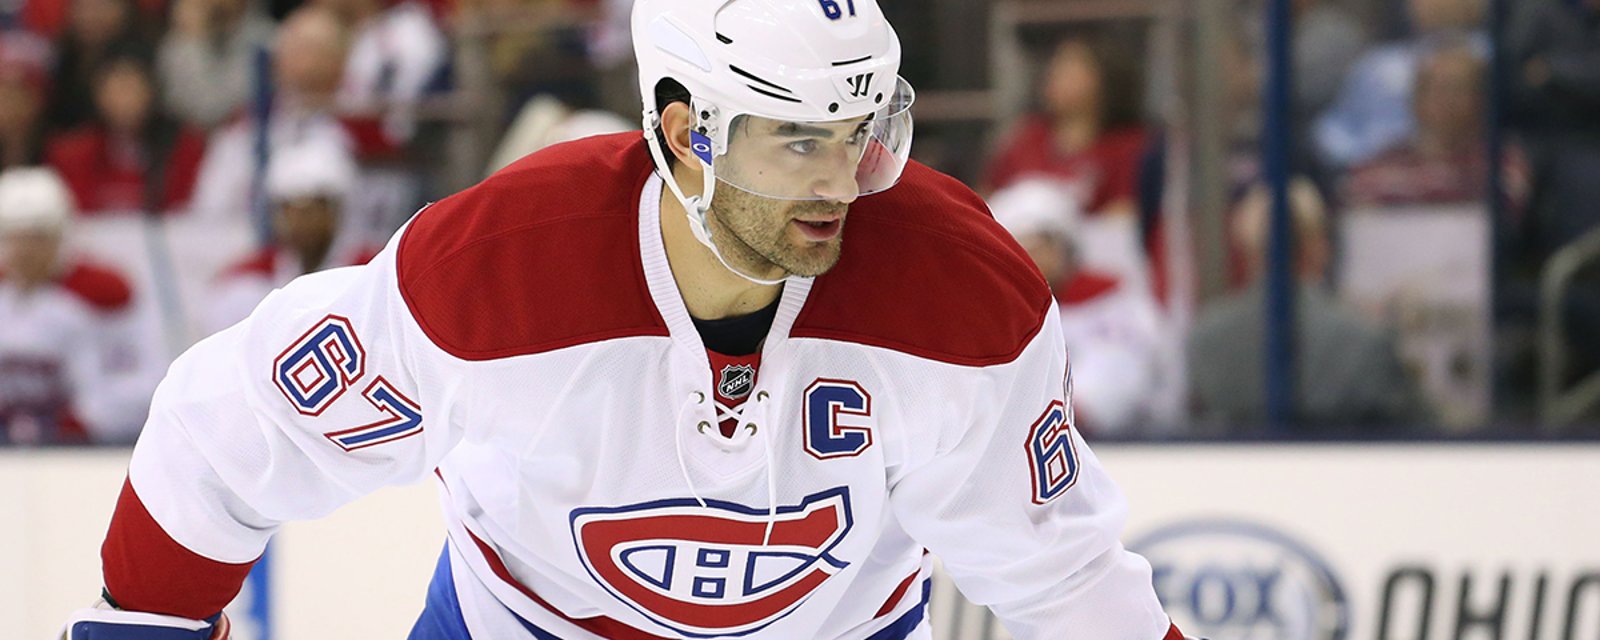 Report: Pacioretty “drowning” in Montreal